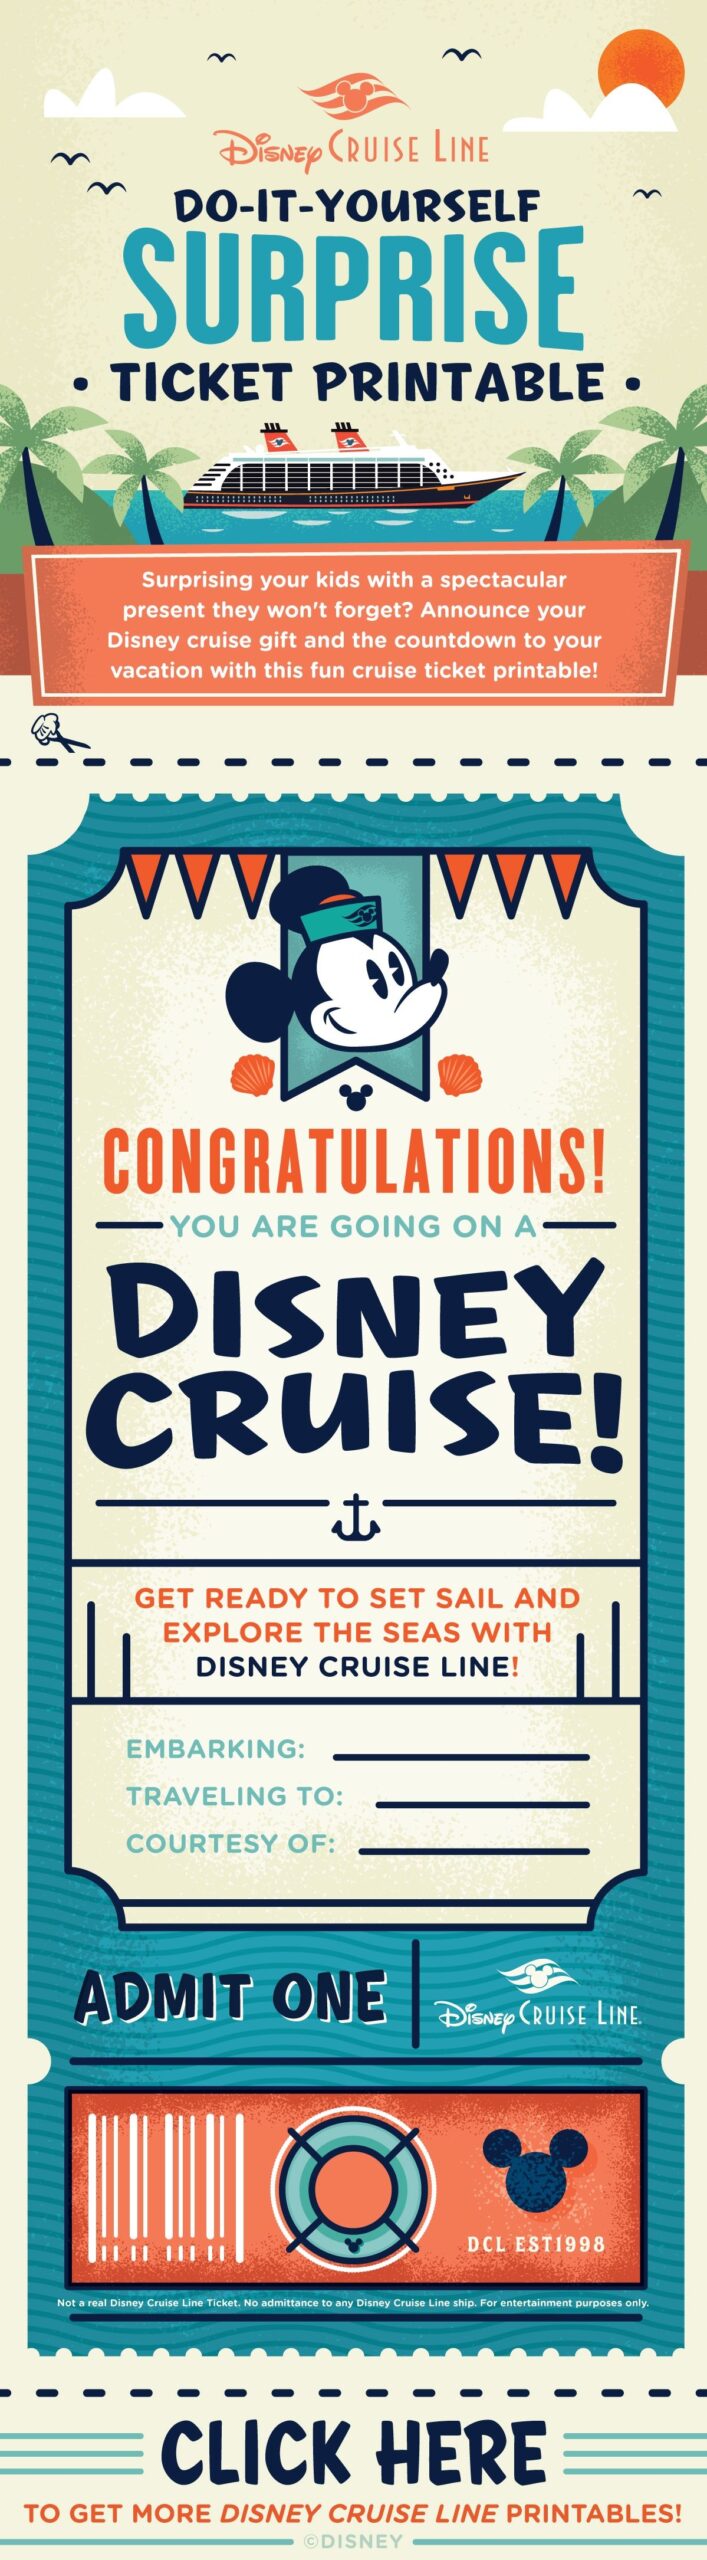 Give The Gift Of A Disney Cruise Vacation With This DIY Surprise Ticket Printable Save This File To Yo Disney Cruise Vacation Disney Cruise Disney Cruise Line